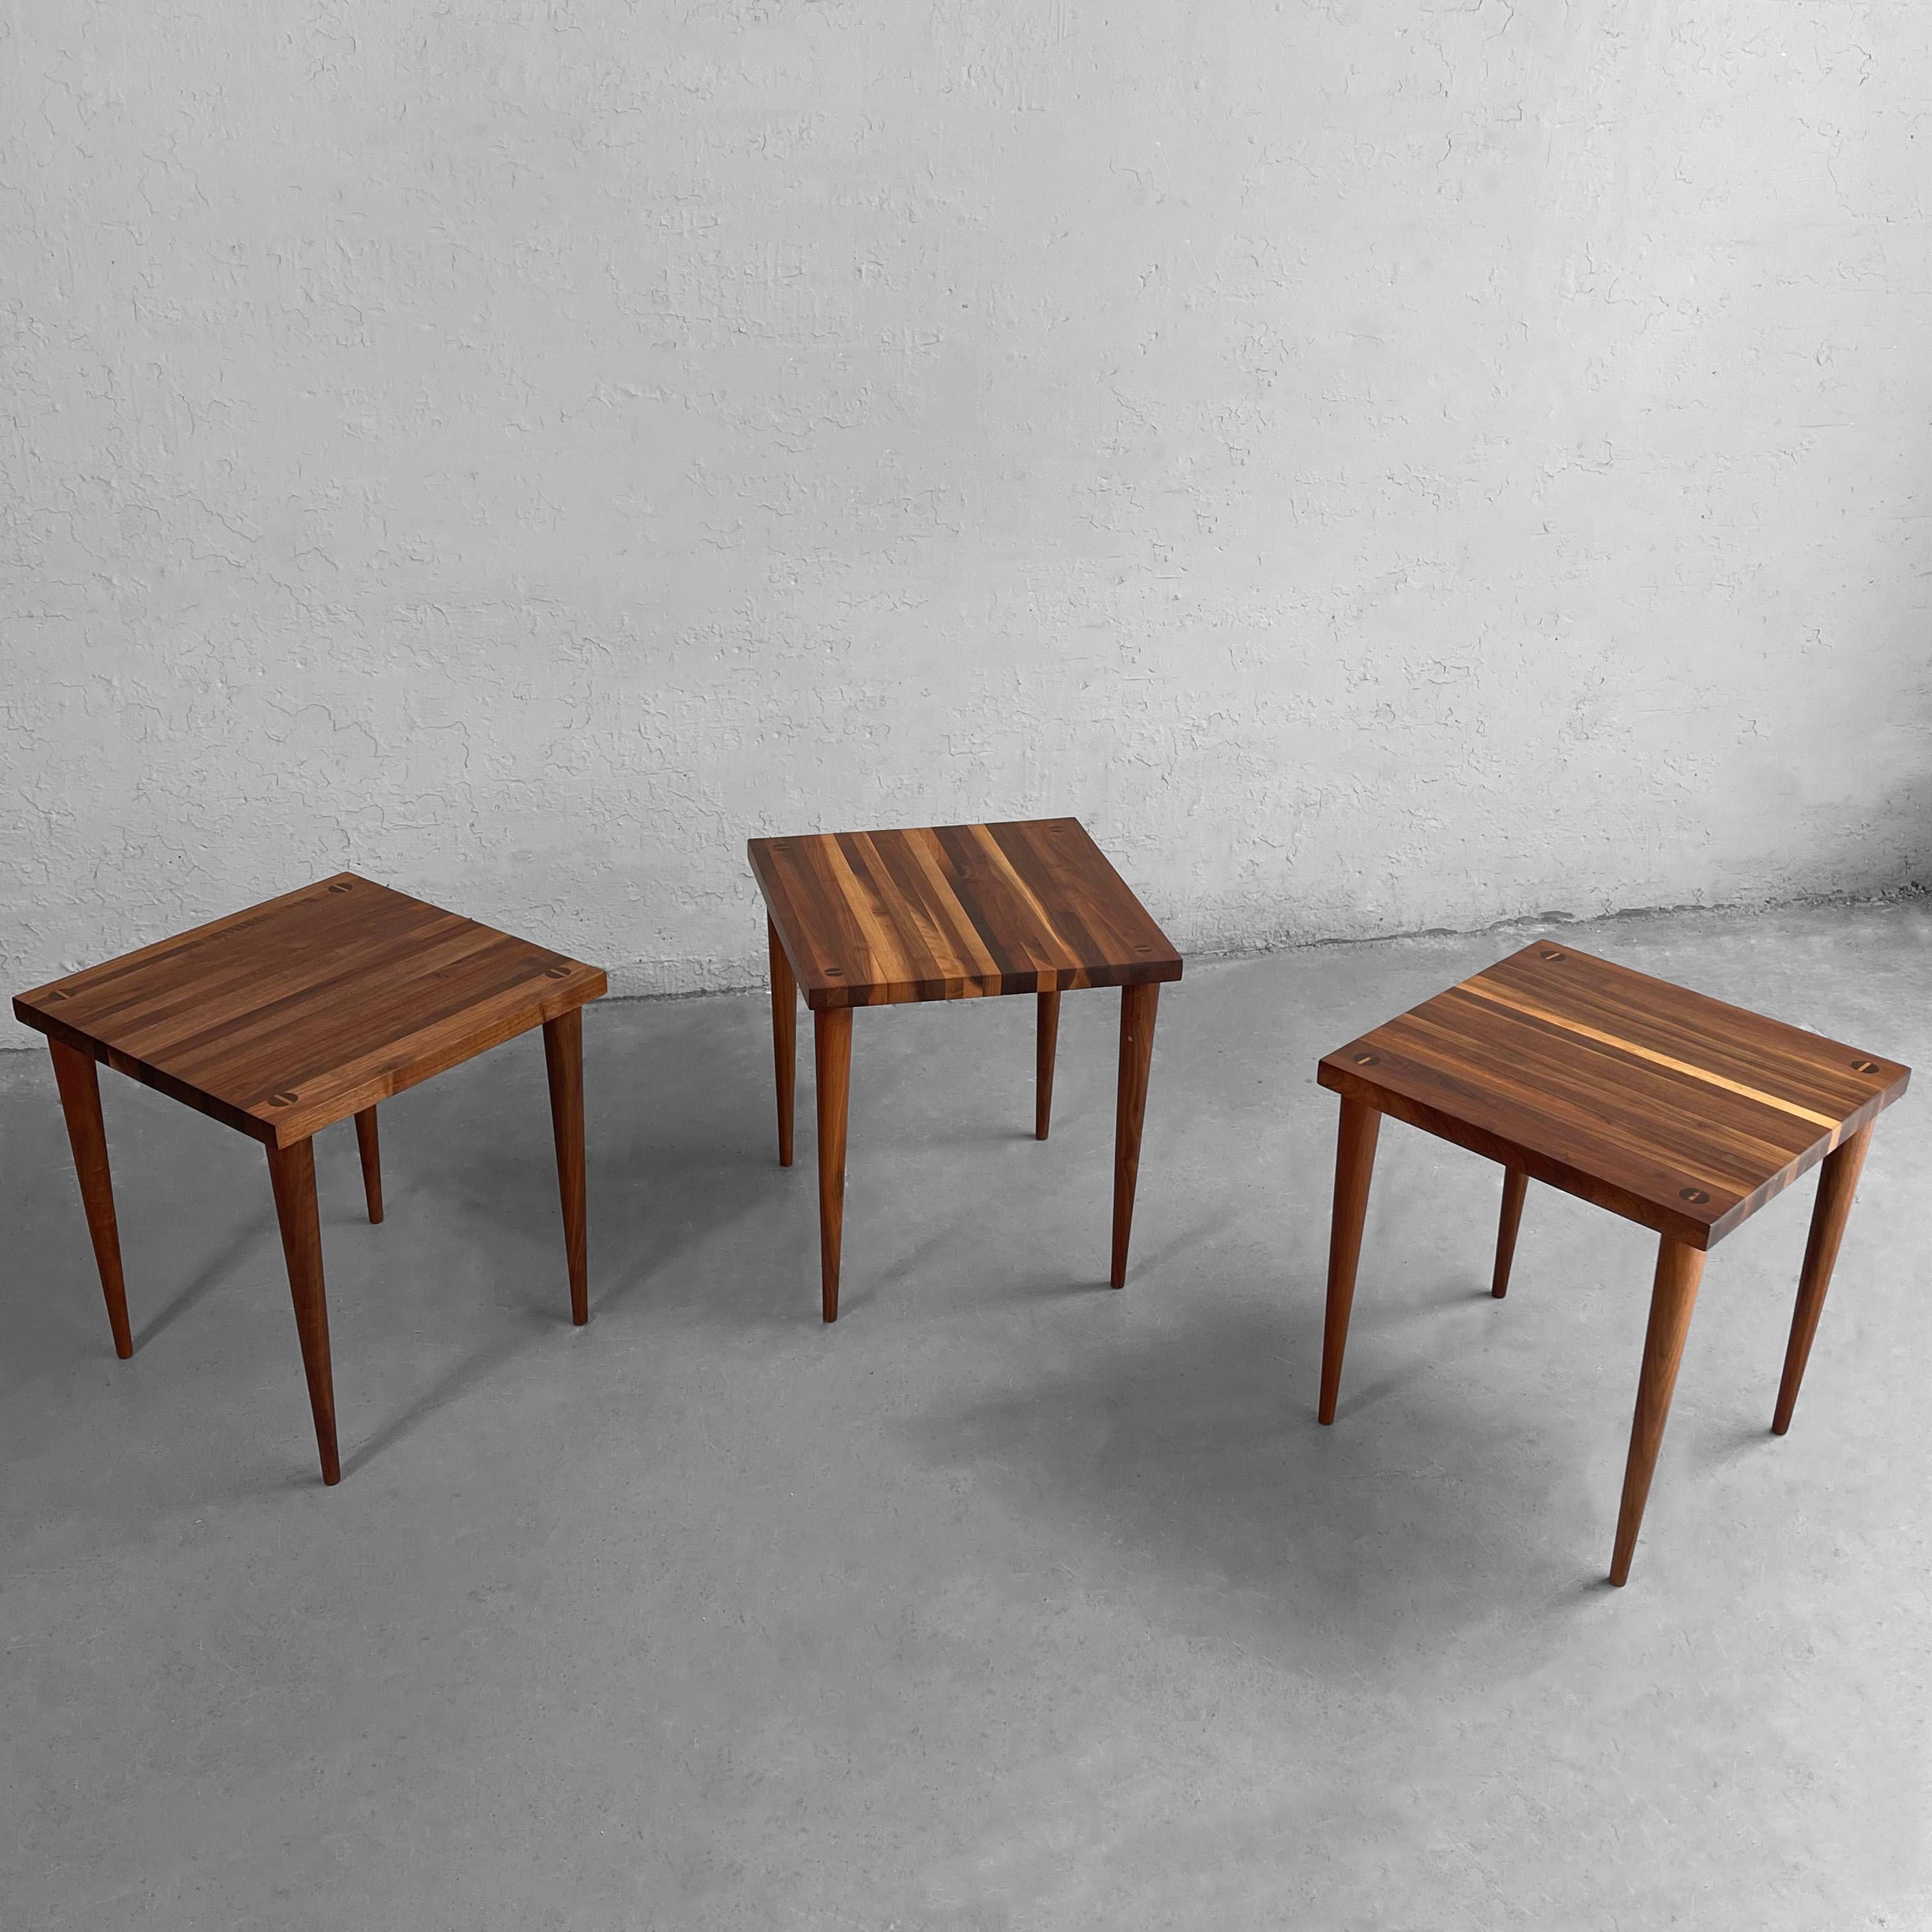 Trio of Mid-Century Modern Stacking Tables by Mel Smilow In Good Condition For Sale In Brooklyn, NY